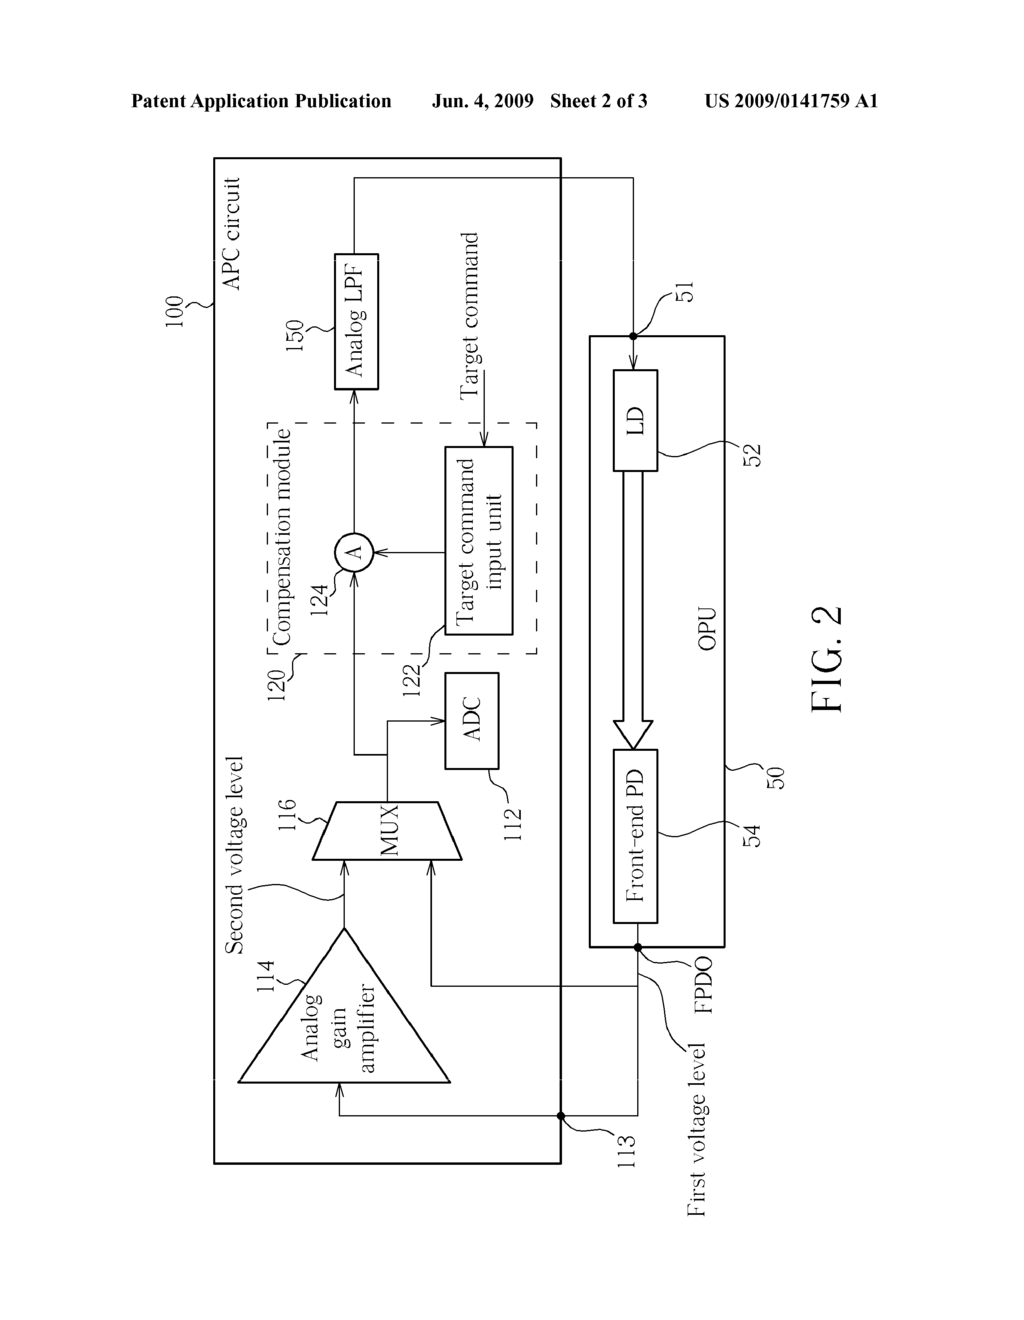 METHOD FOR DERIVING PRECISE CONTROL OVER LASER POWER OF AN OPTICAL PICKUP UNIT, AND ASSOCIATED AUTOMATIC POWER CALIBRATION CIRCUIT - diagram, schematic, and image 03